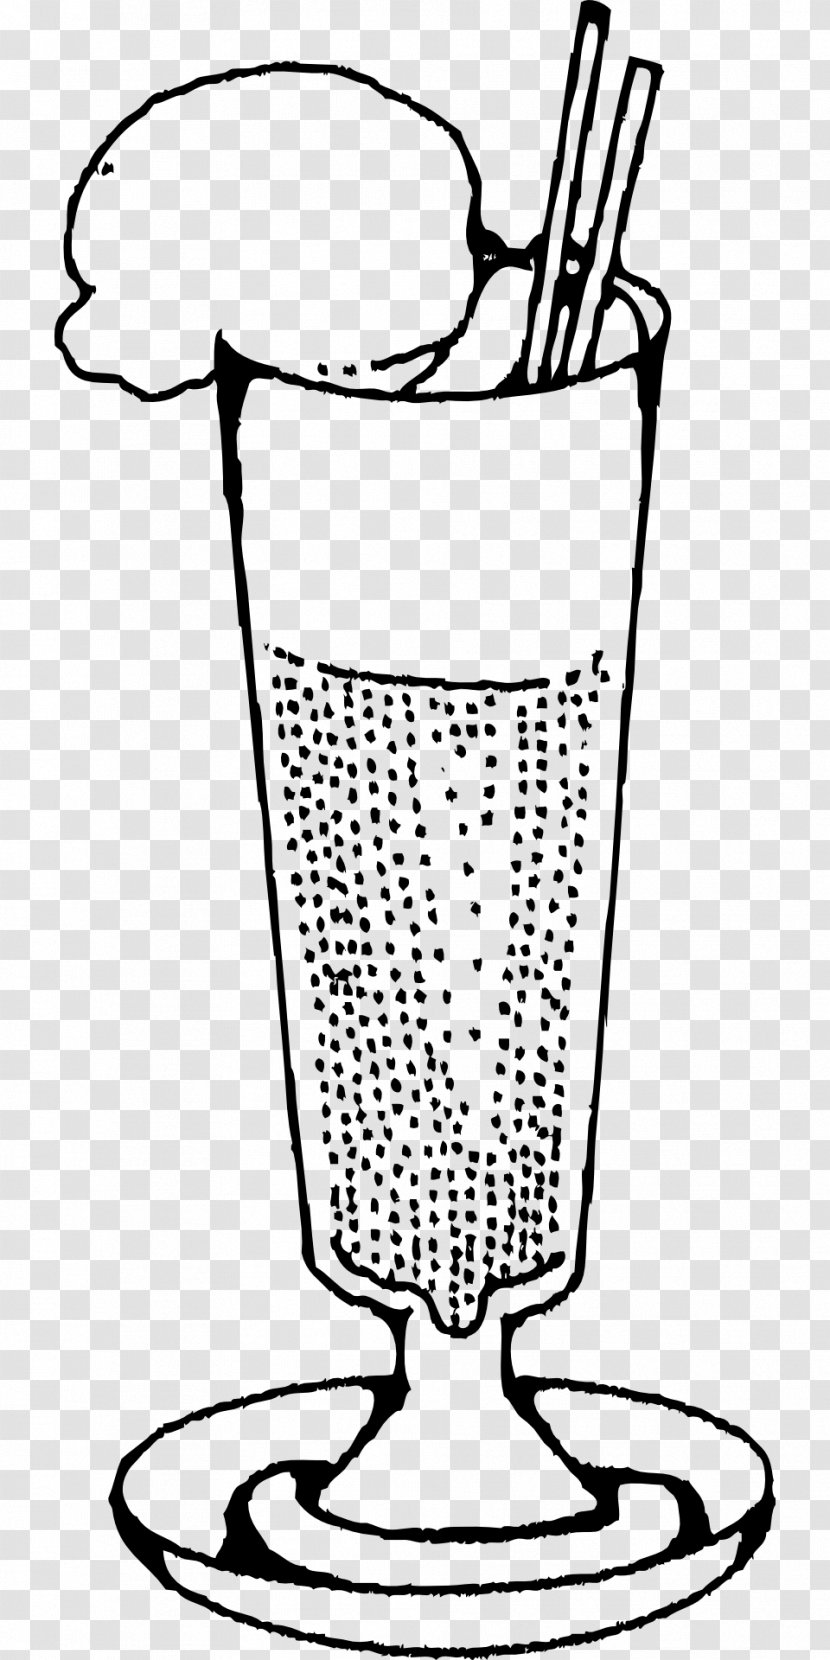 Cream Soda Fizzy Drinks Ice Cones Italian - Root Beer - Iced Coffee Transparent PNG